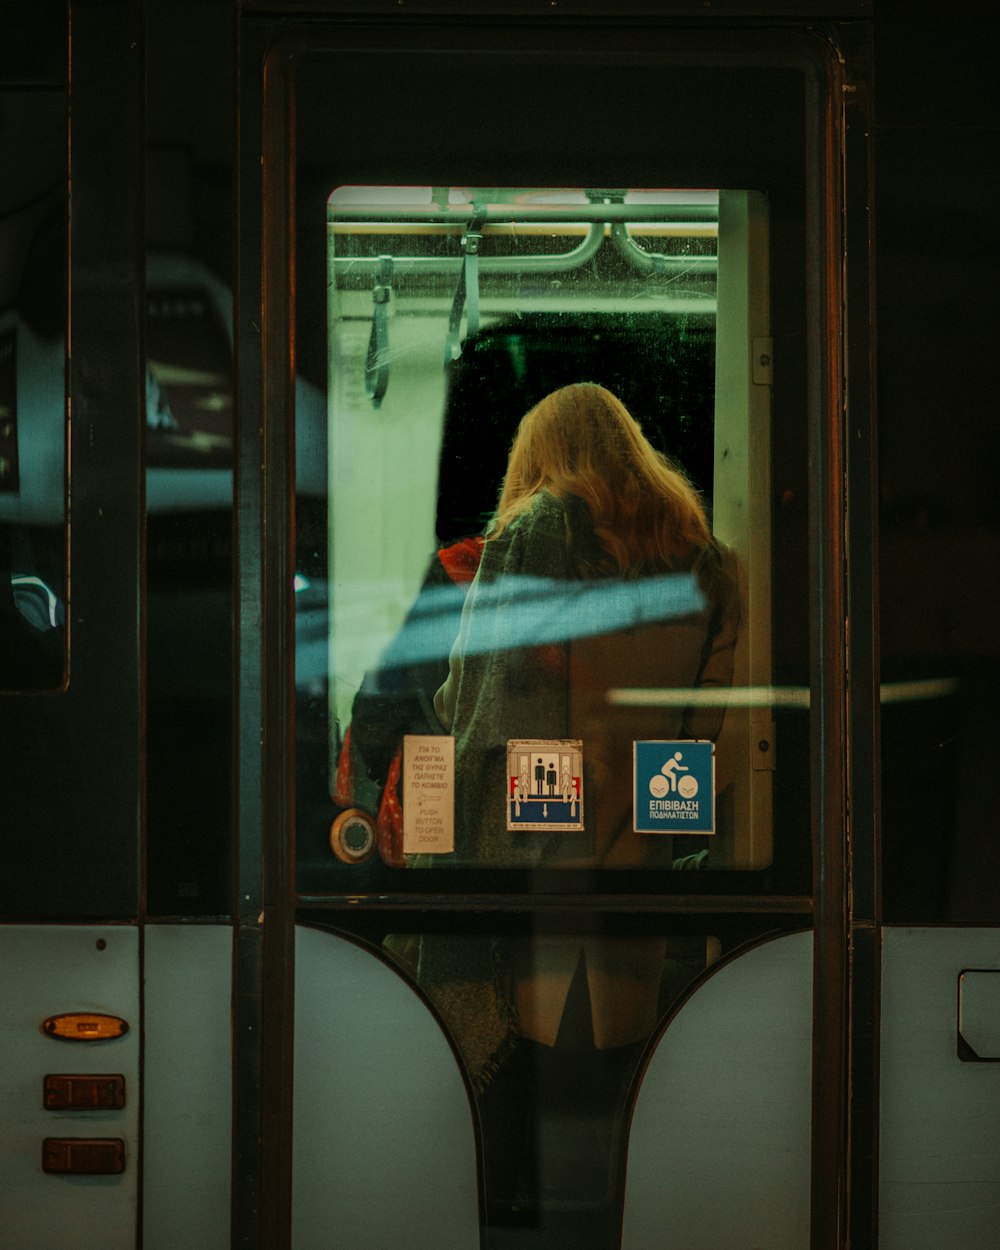 a woman sitting on a bus looking out the window